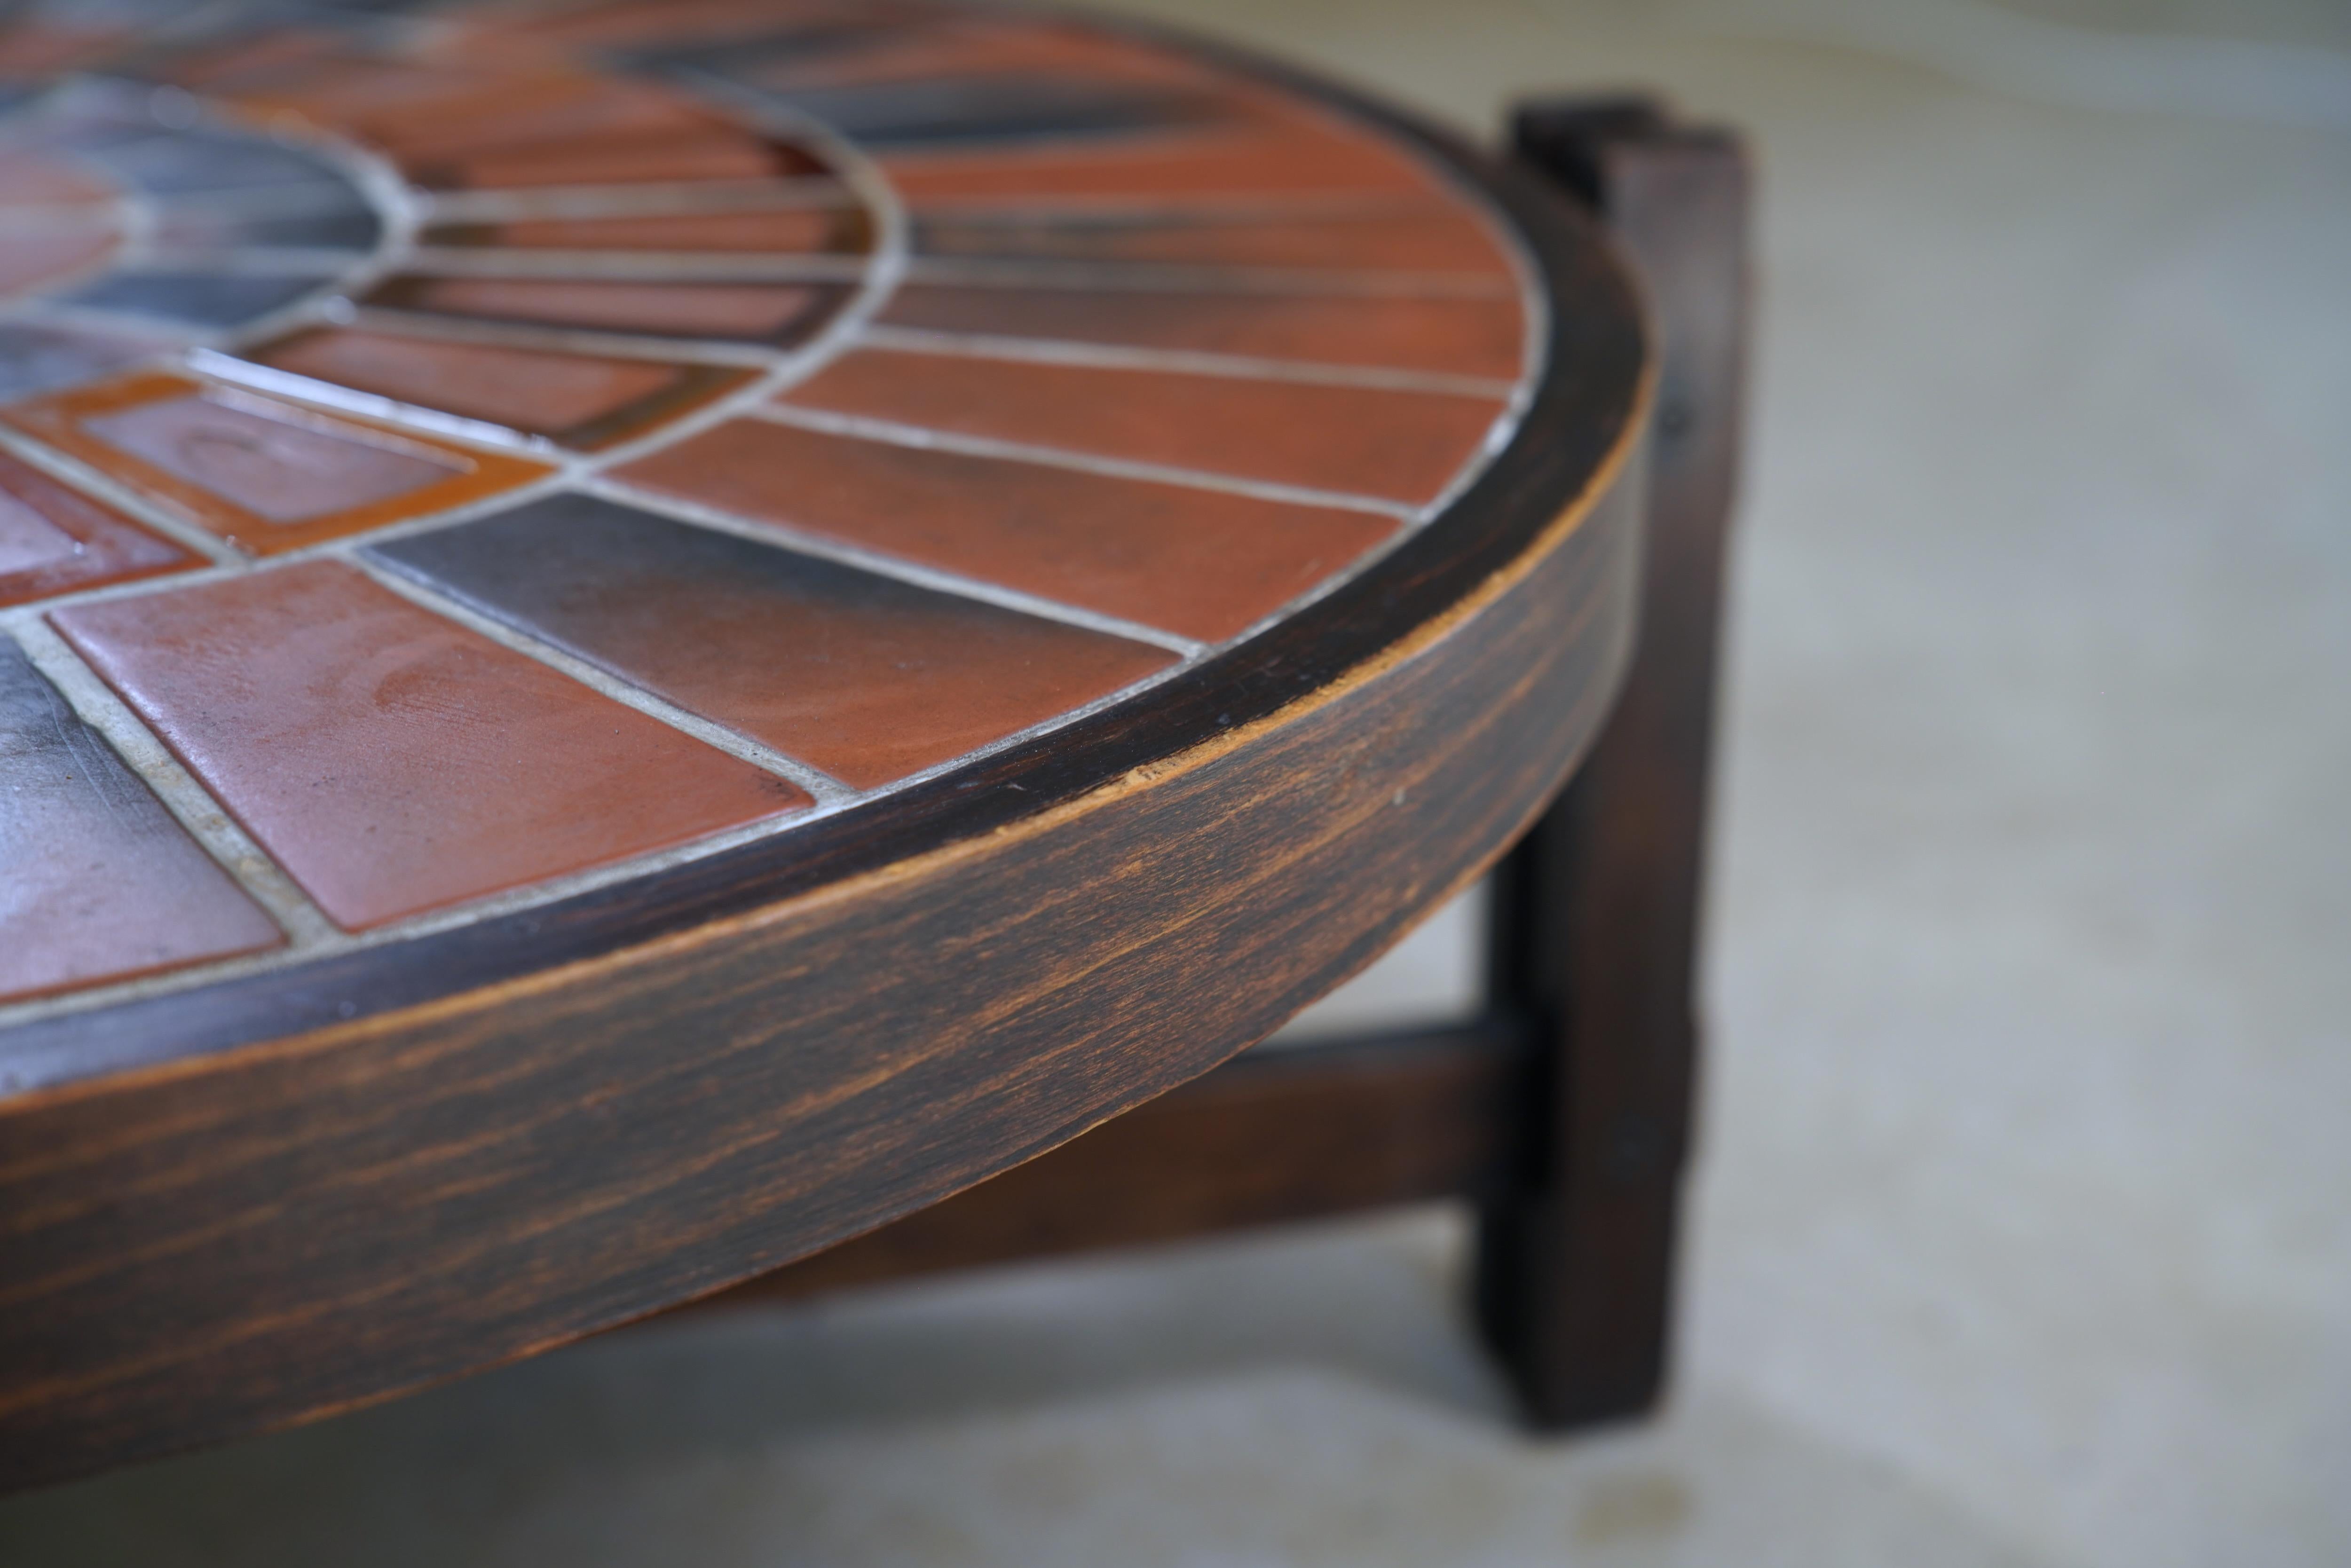 Glazed Roger Capron Round Coffee Table with Garrigue Tiles, France 1960s